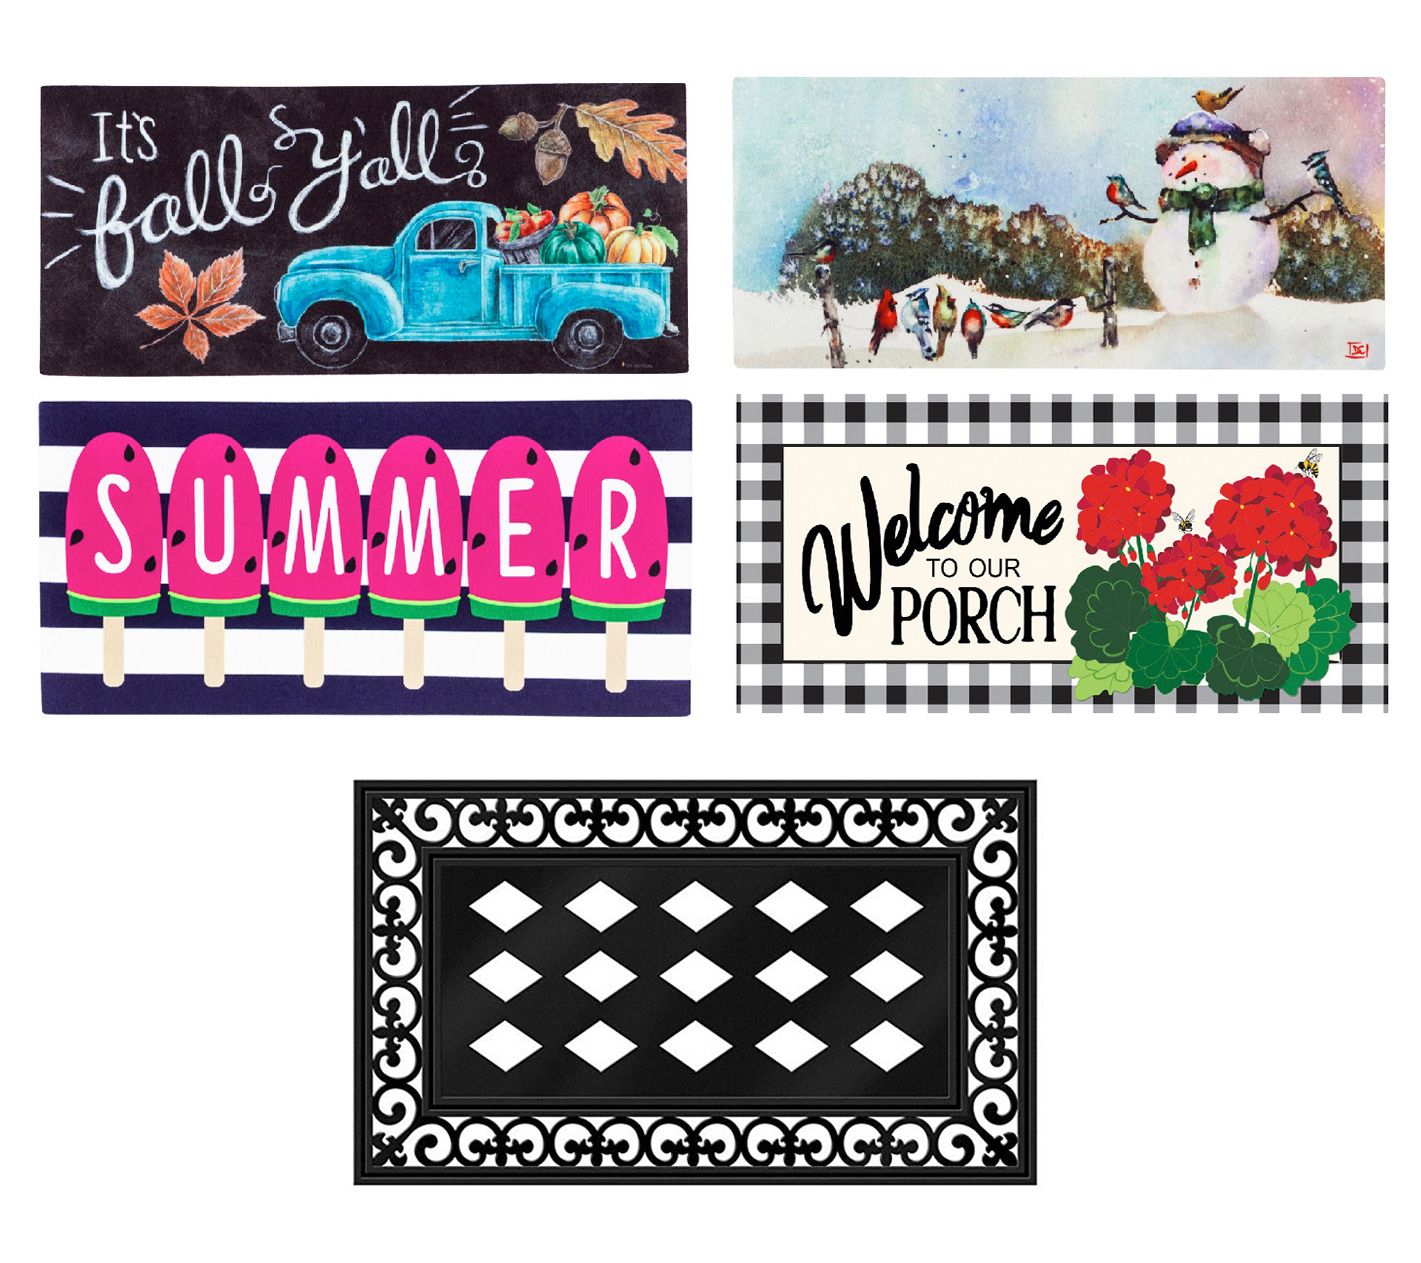 Home Reflections S/4 Seasonal Doormats with Decorative Base 